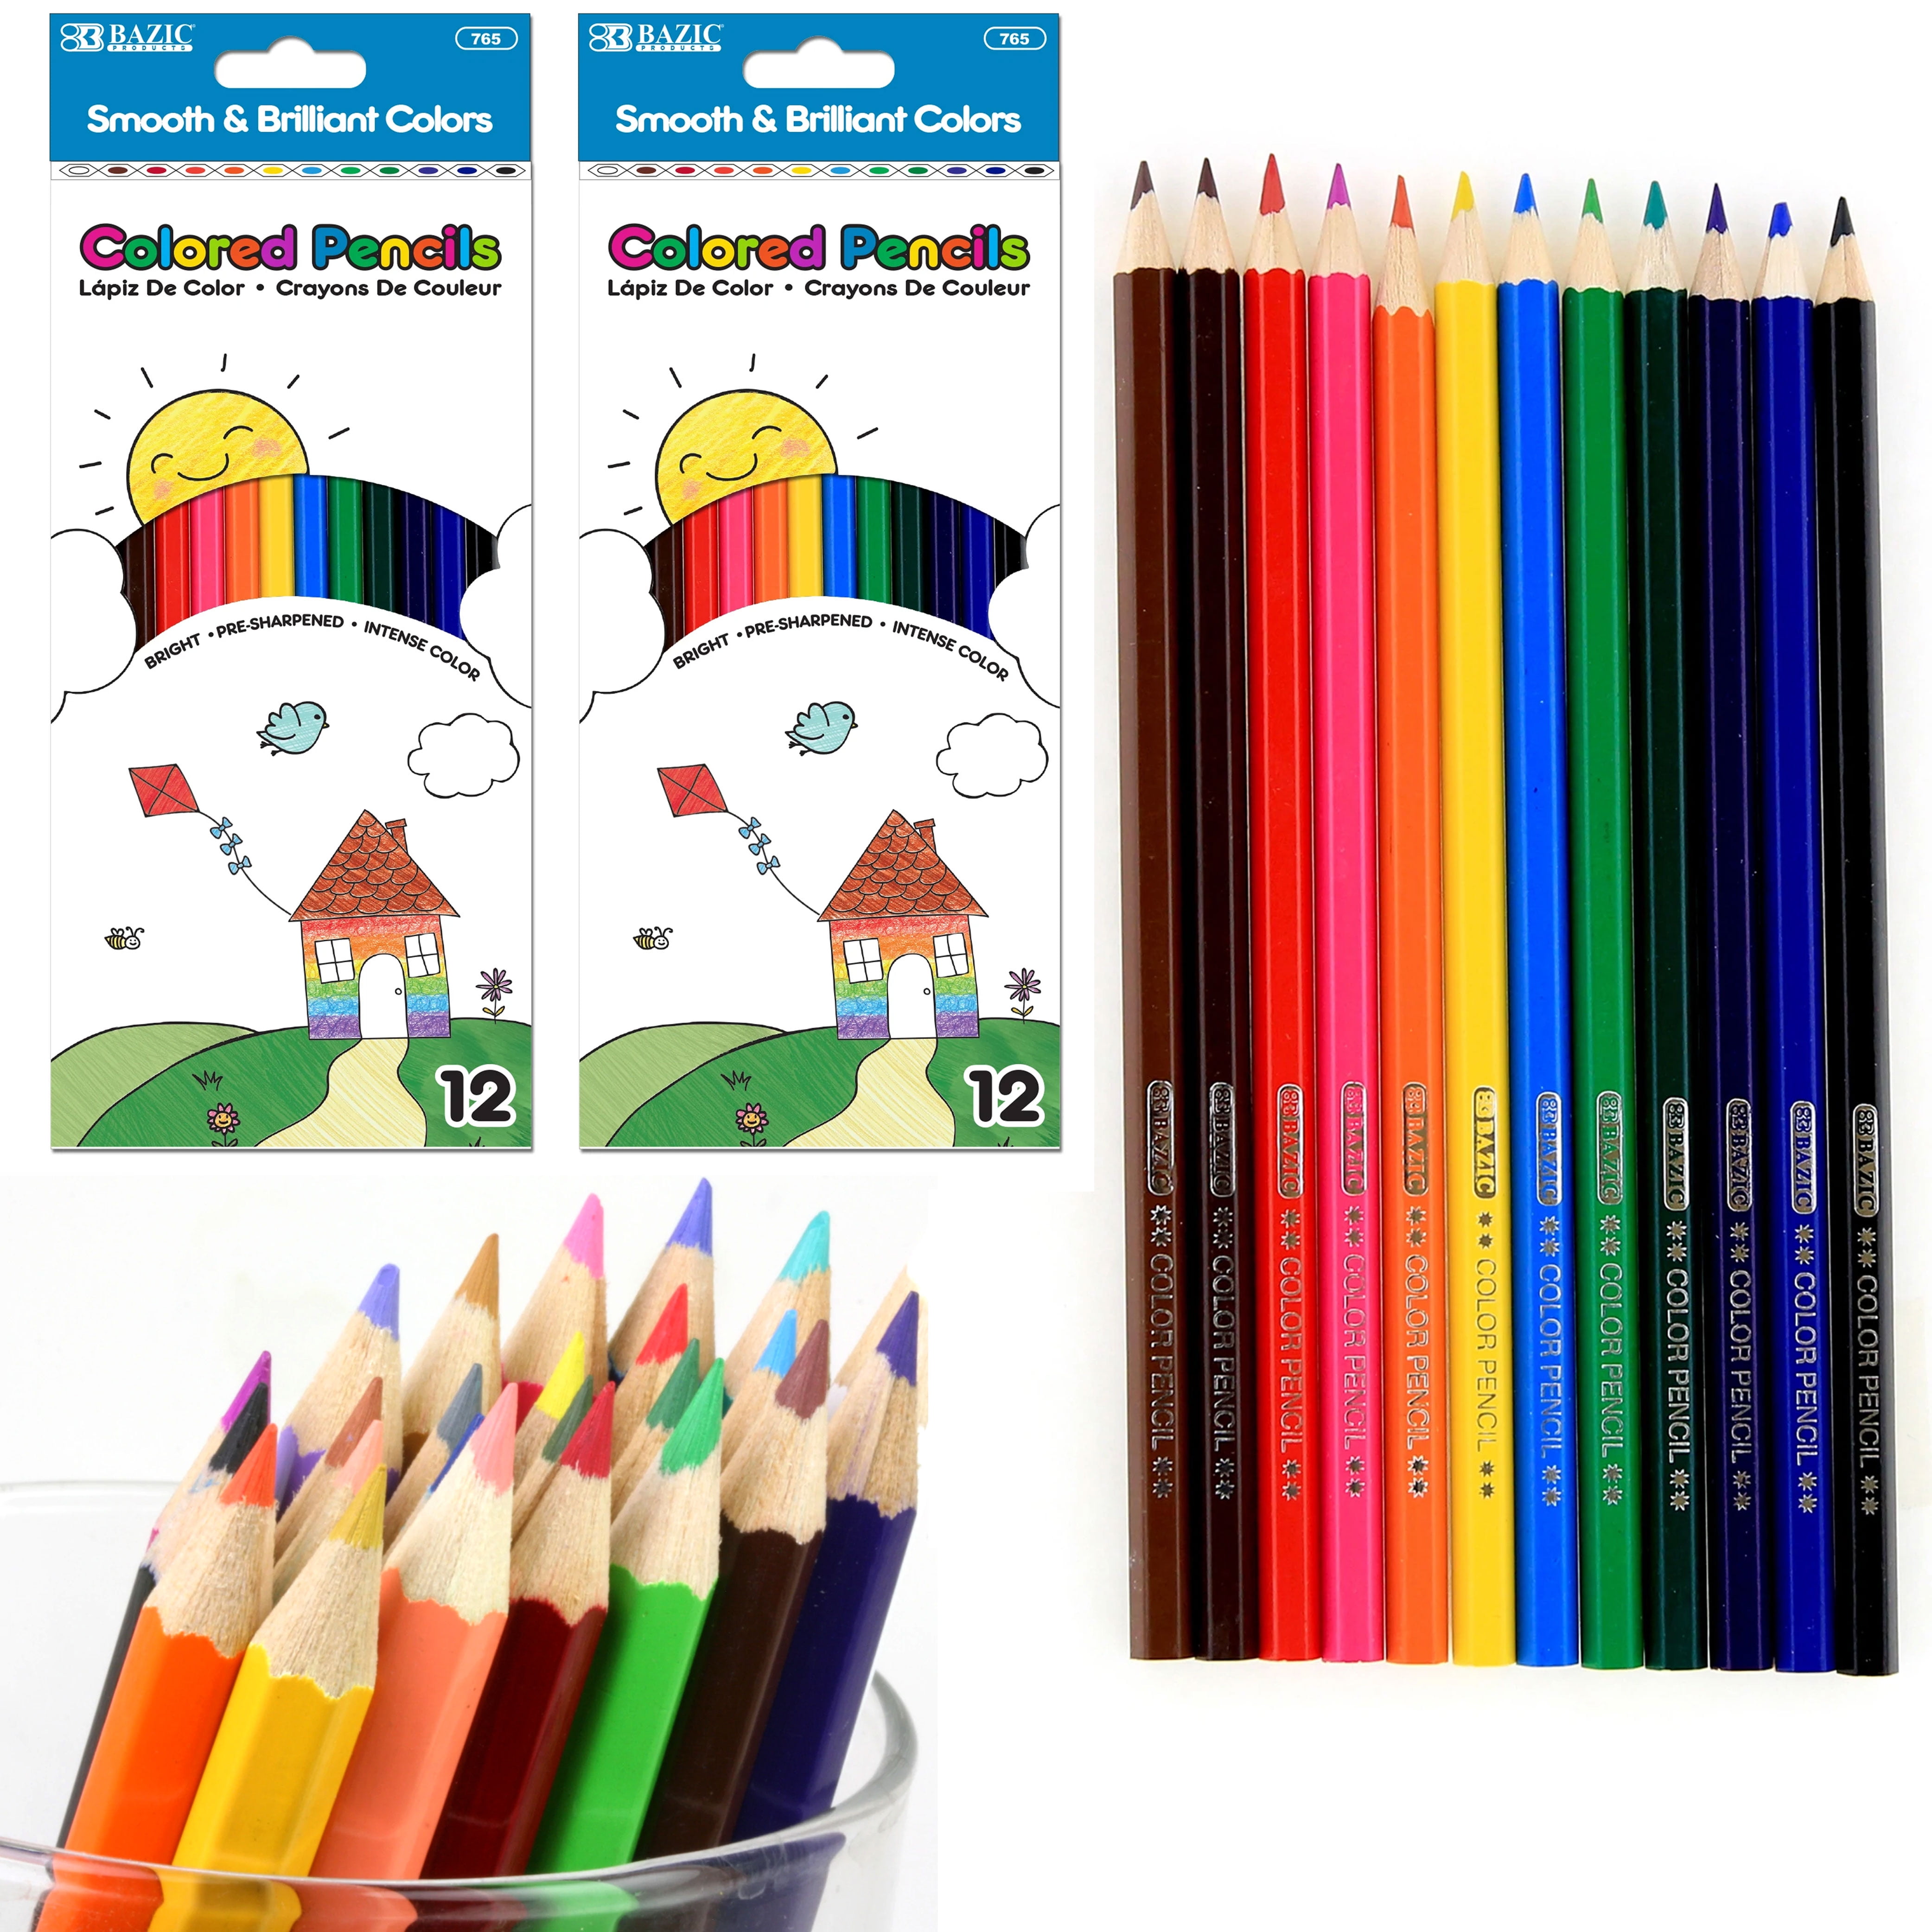 Enday Colored Pencils 12 Count, Pre-Sharpened Color Pencils for Kids and Adult, Art and School Supplies for Drawing, Pack of 144 Coloring Pencils